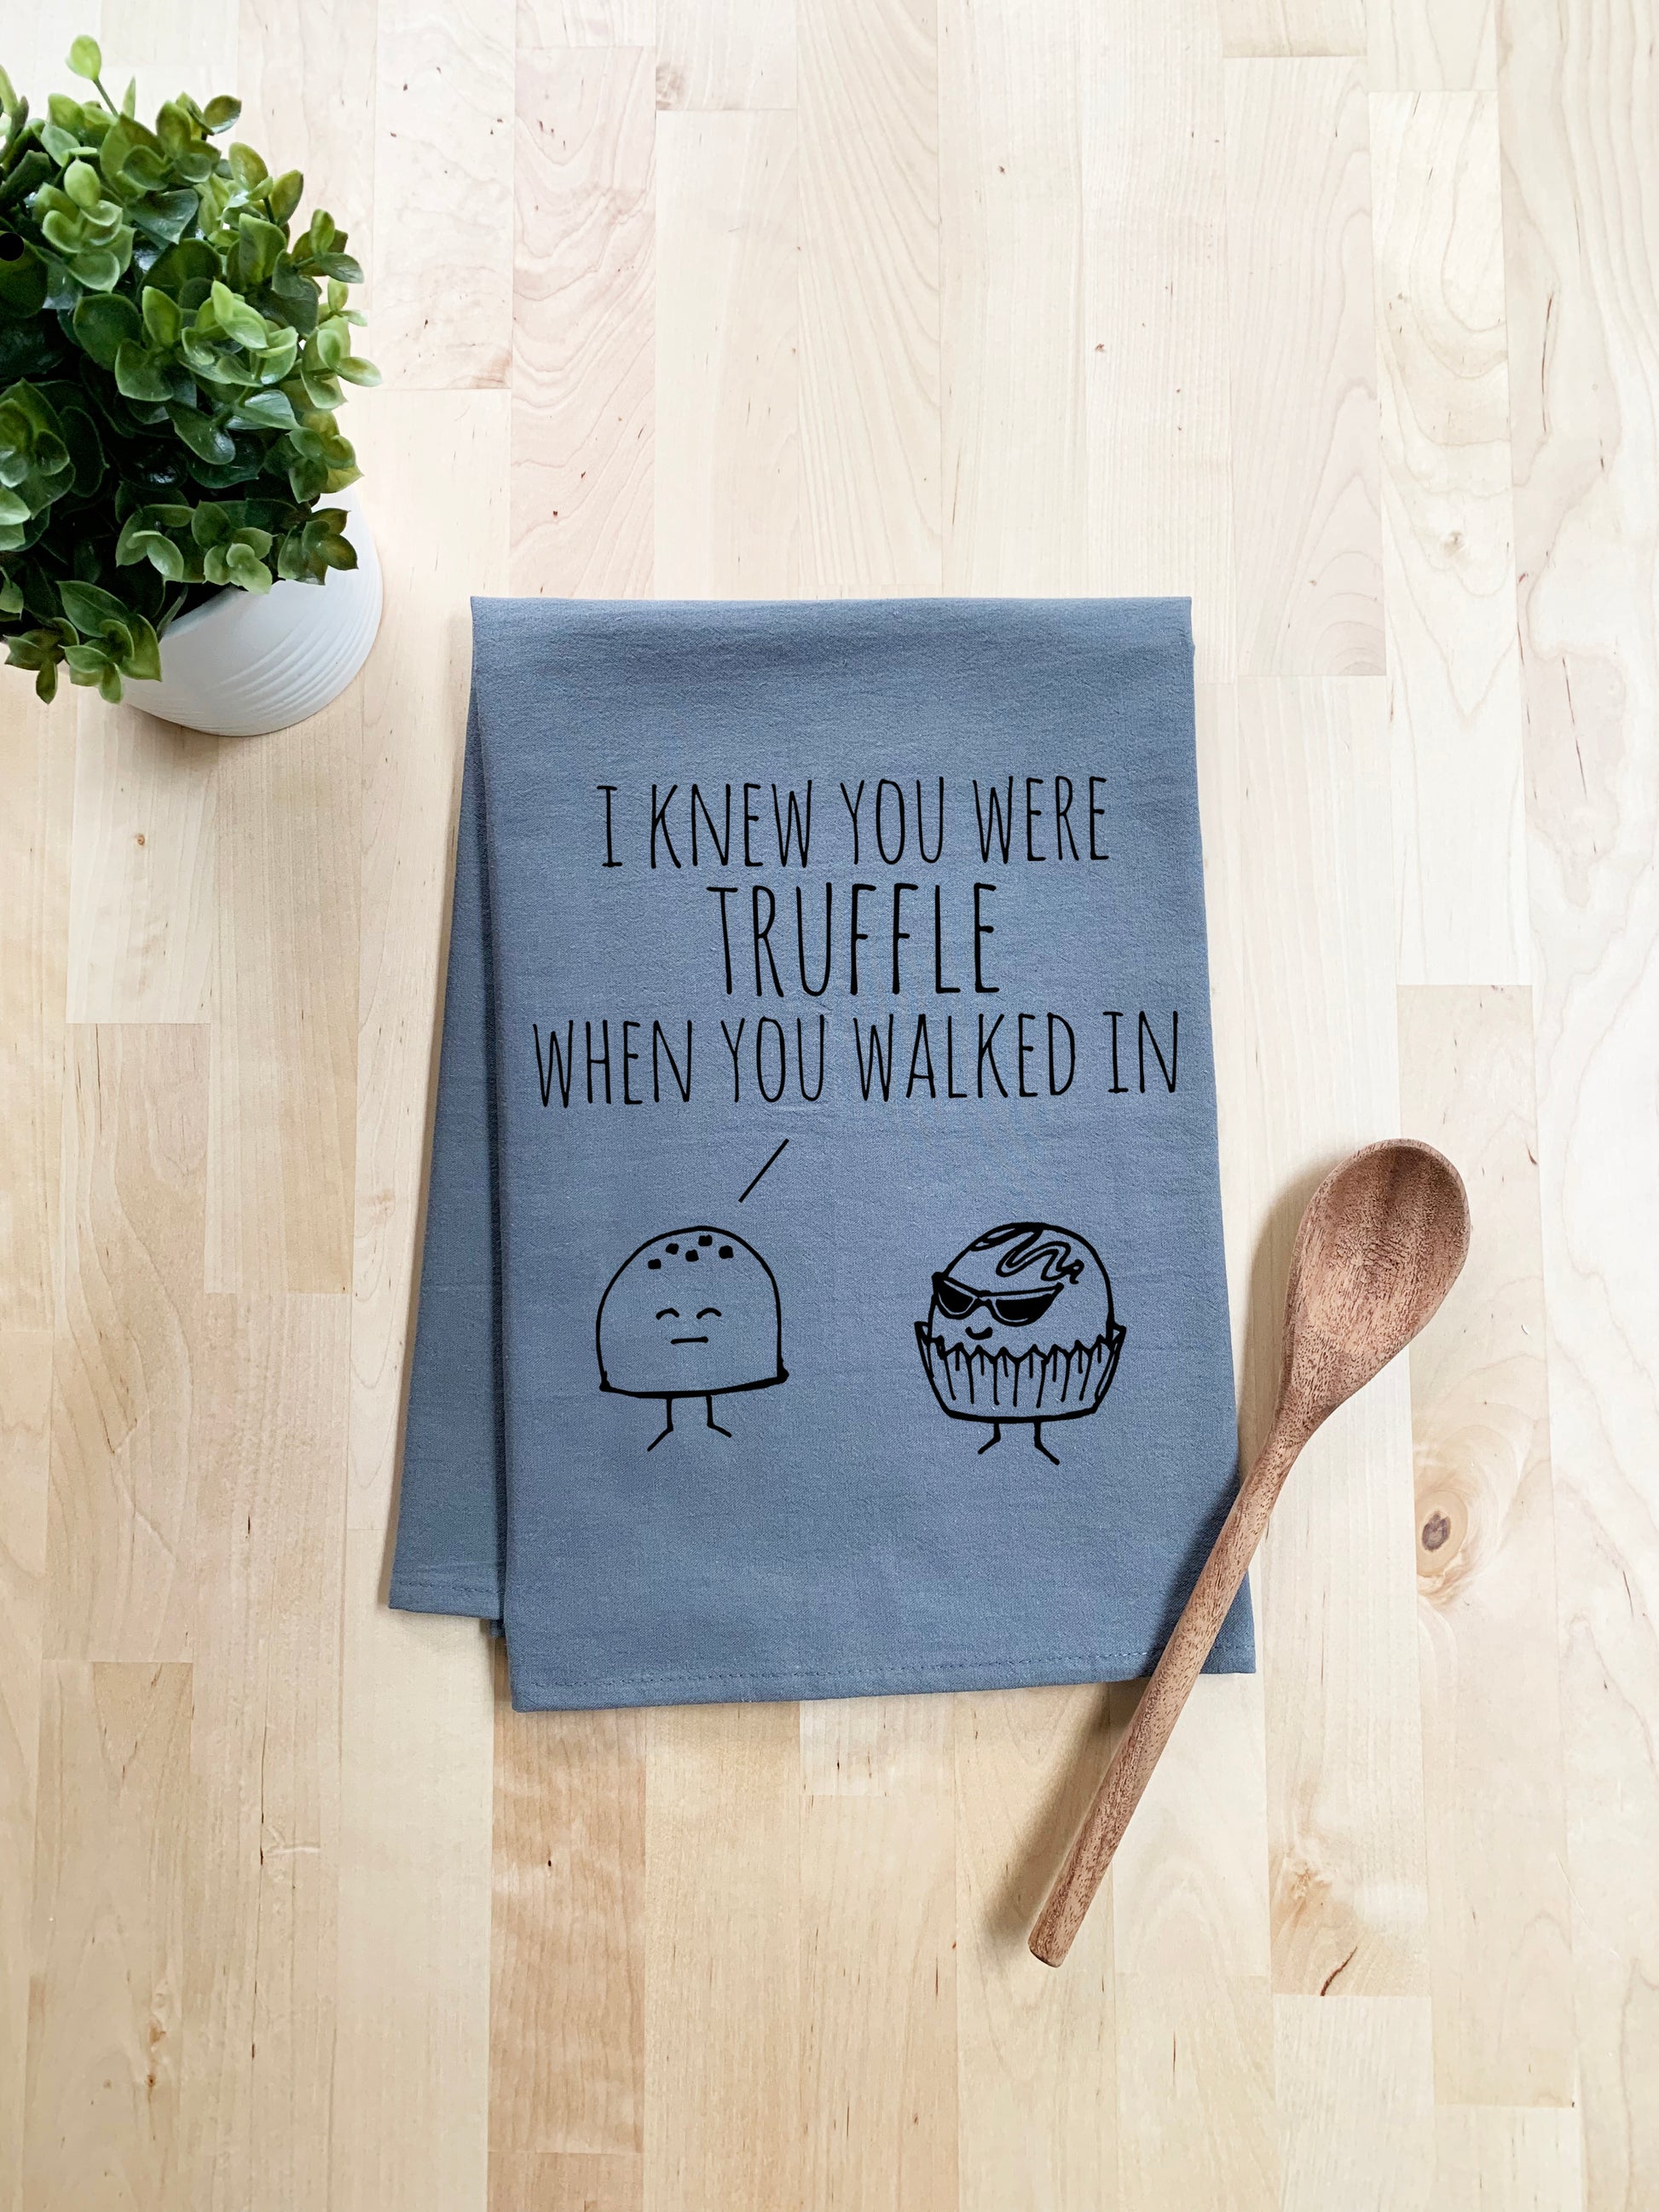 I Knew You Were Truffle when You Walked In - Dish Towel - White Or Gray - MoonlightMakers